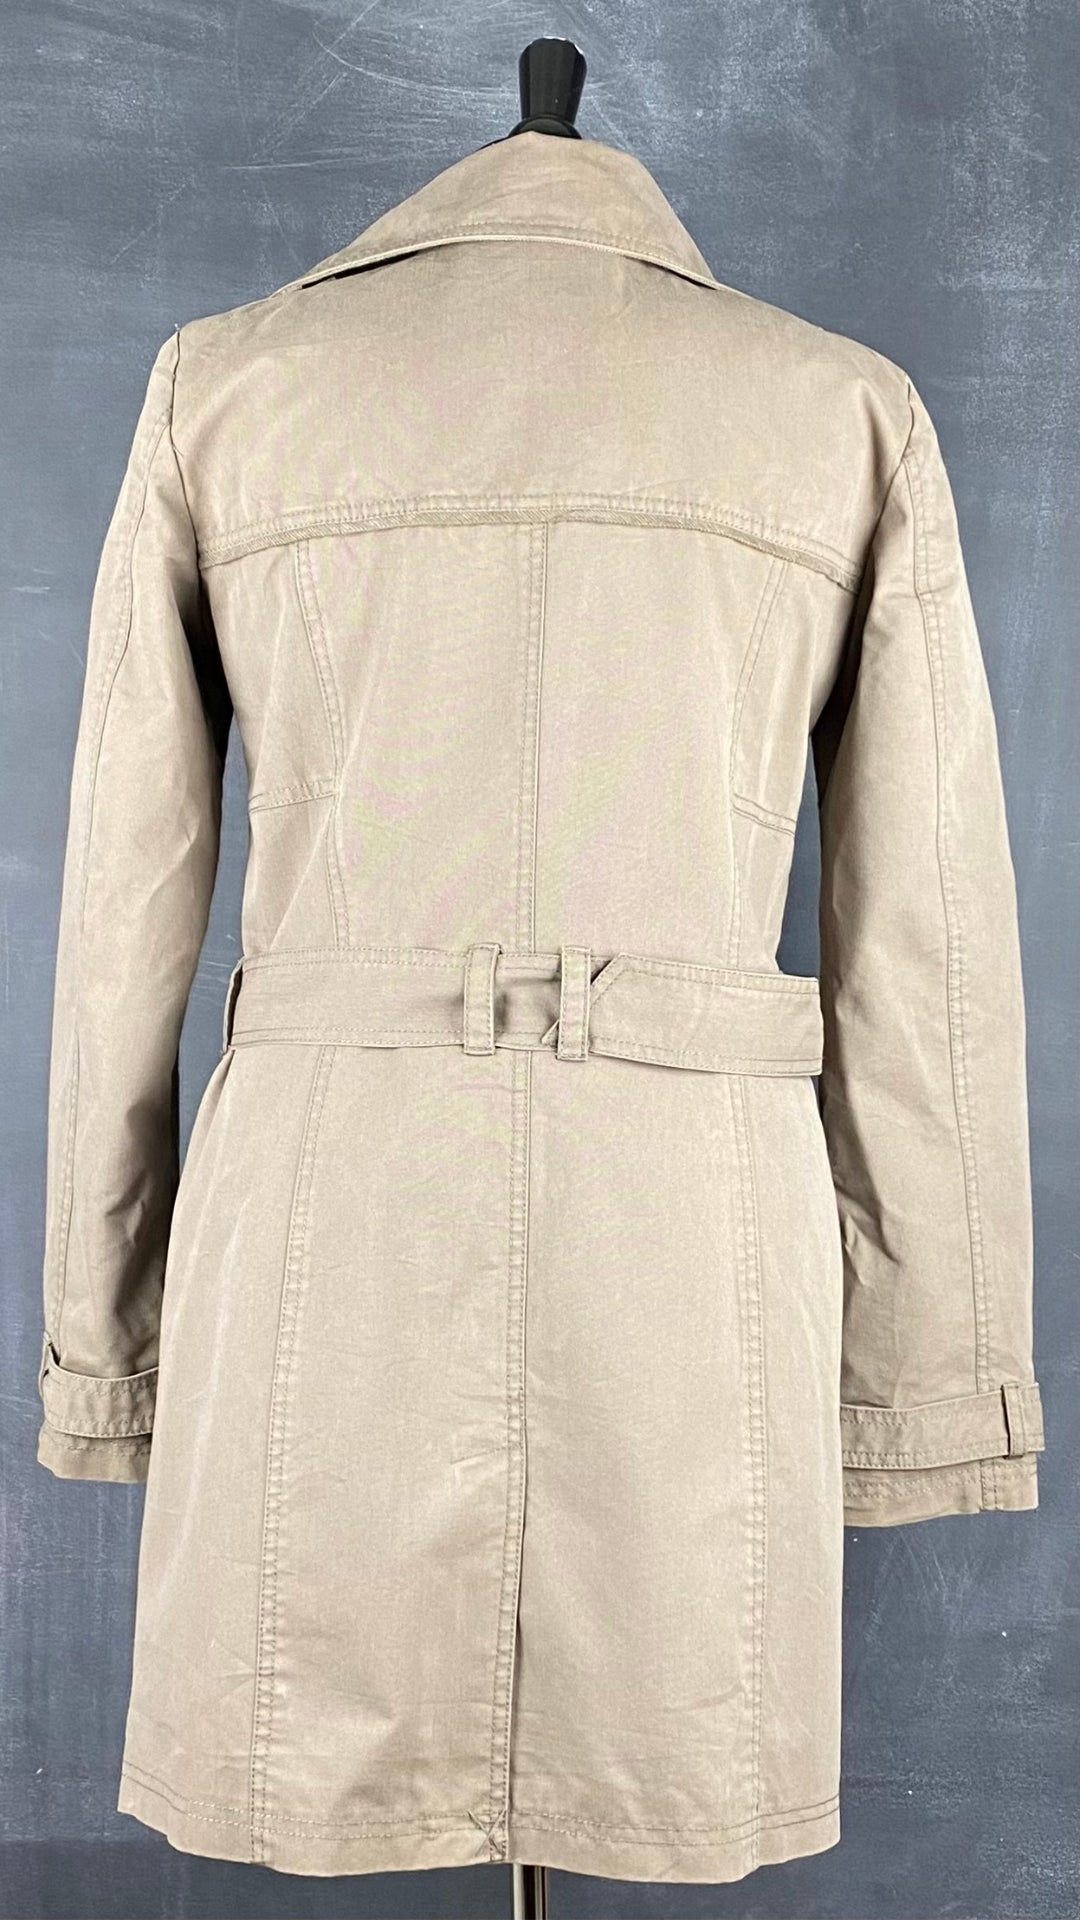 Trench neuf taupe Tom Tailor taille small. Vue de dos.